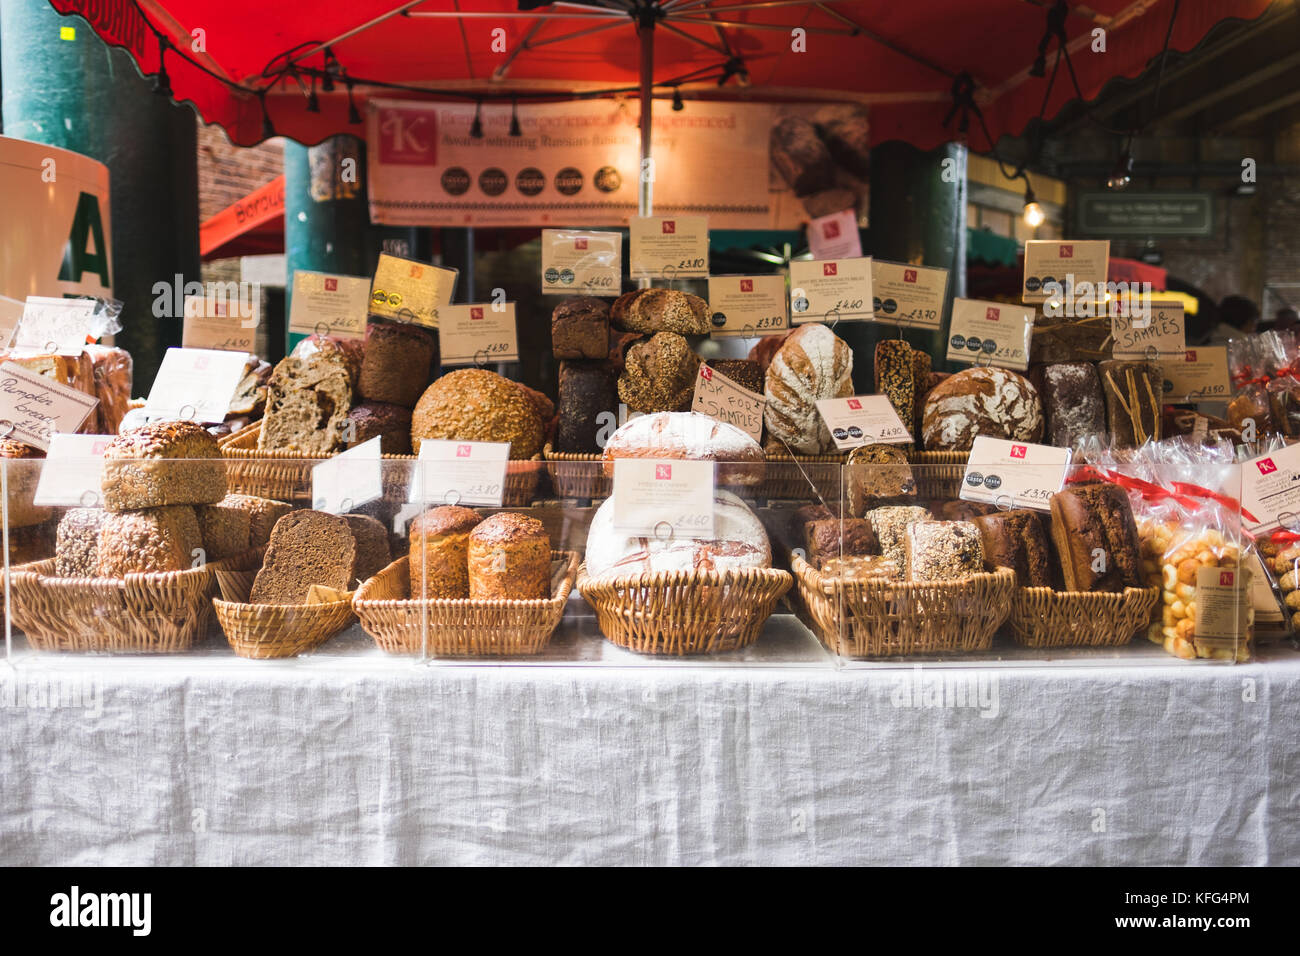 A baker selling bread displays his produce Stock Photo